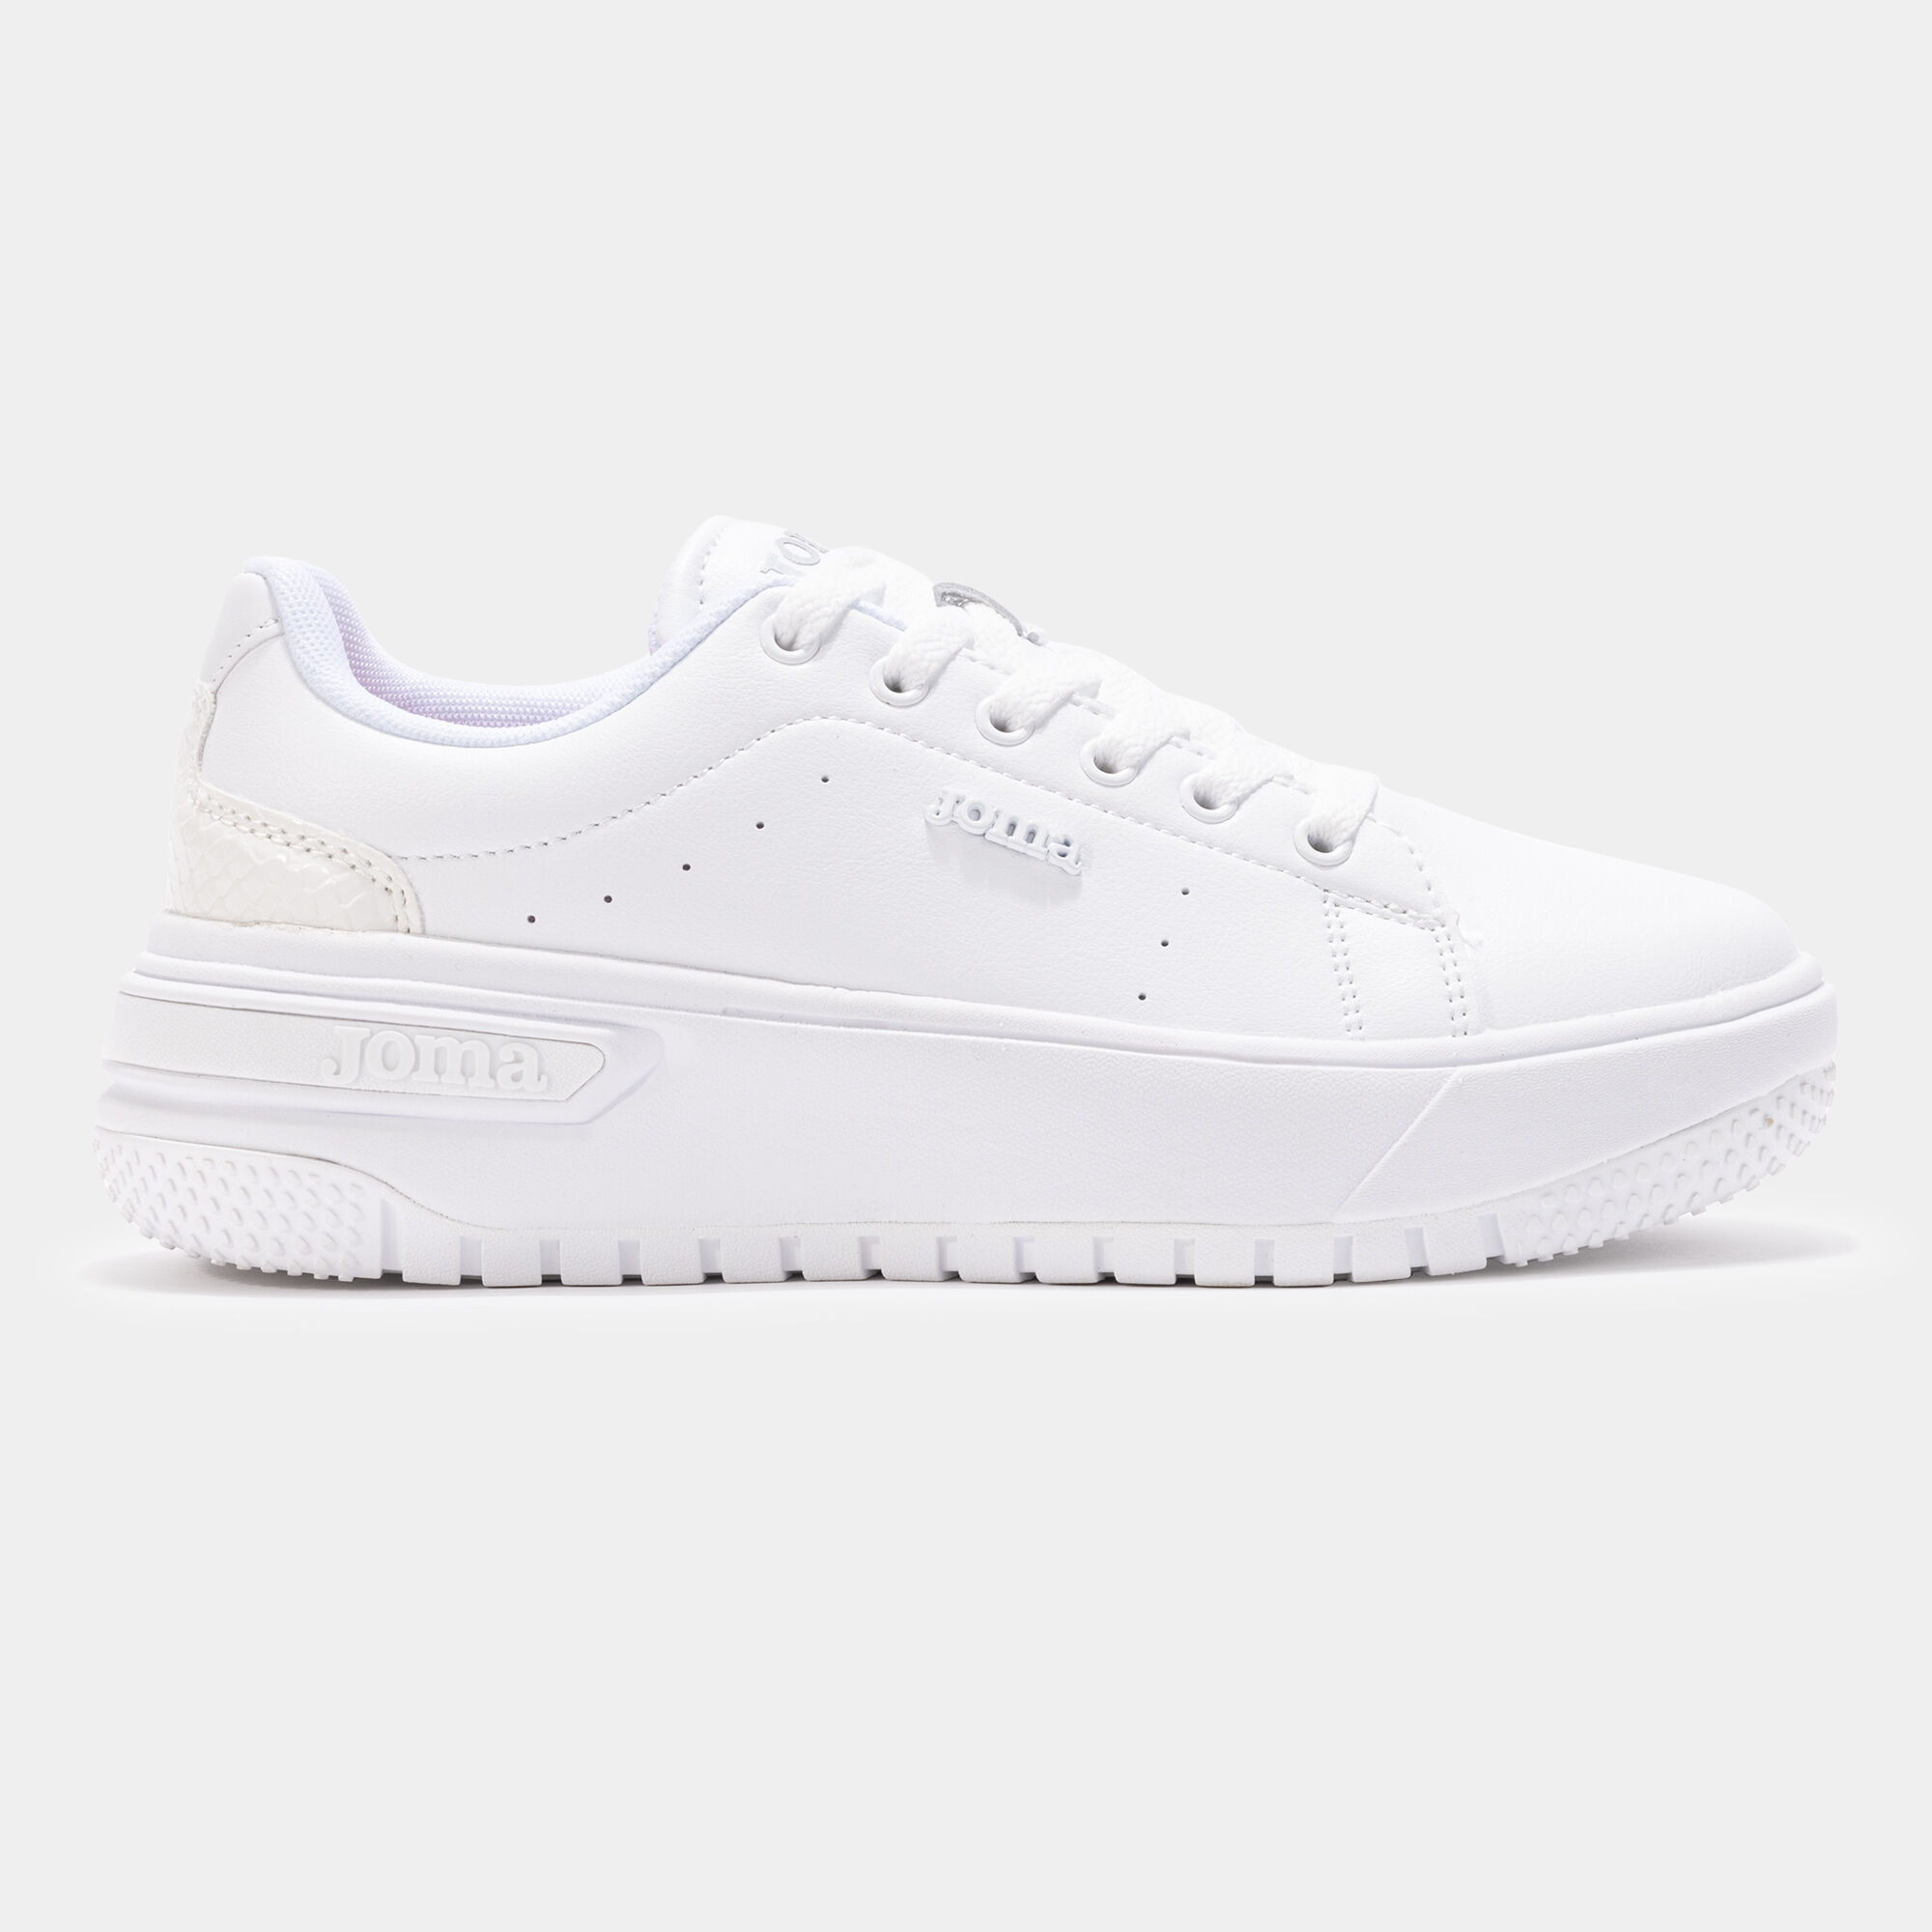 Chaussures casual C.Princeton Lady 23 femme blanc